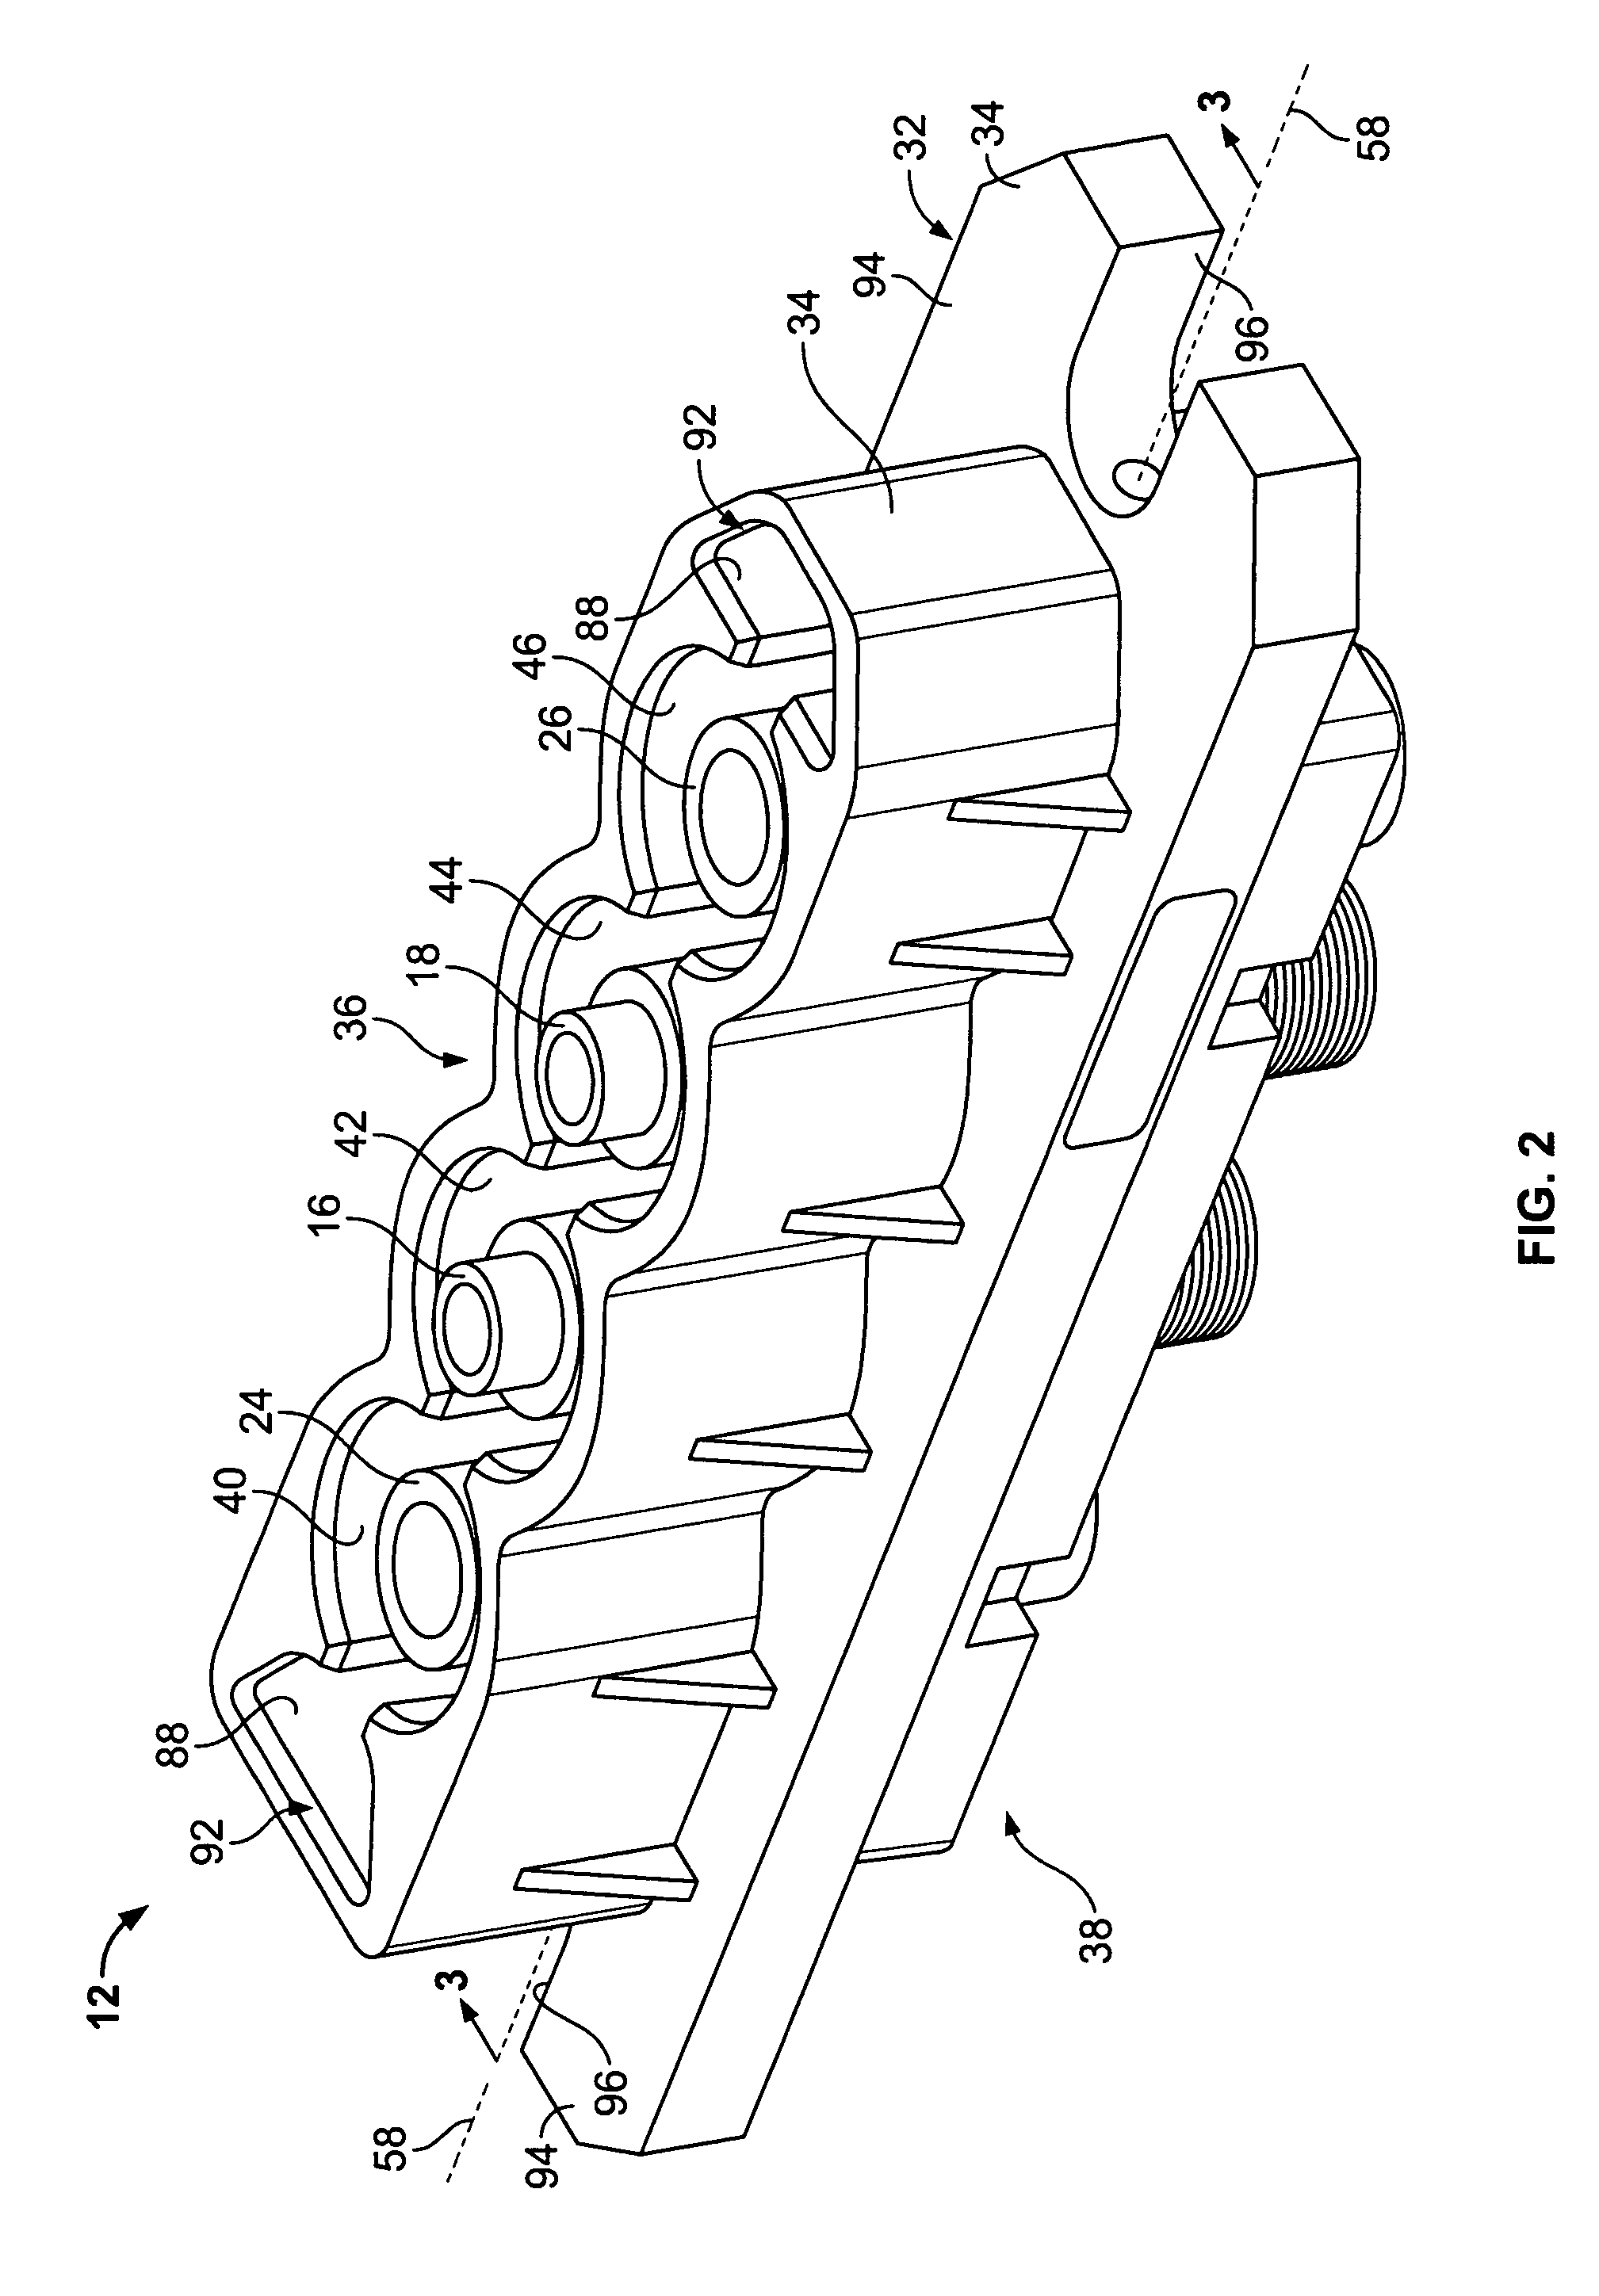 Electrical connector having a fluid coupling